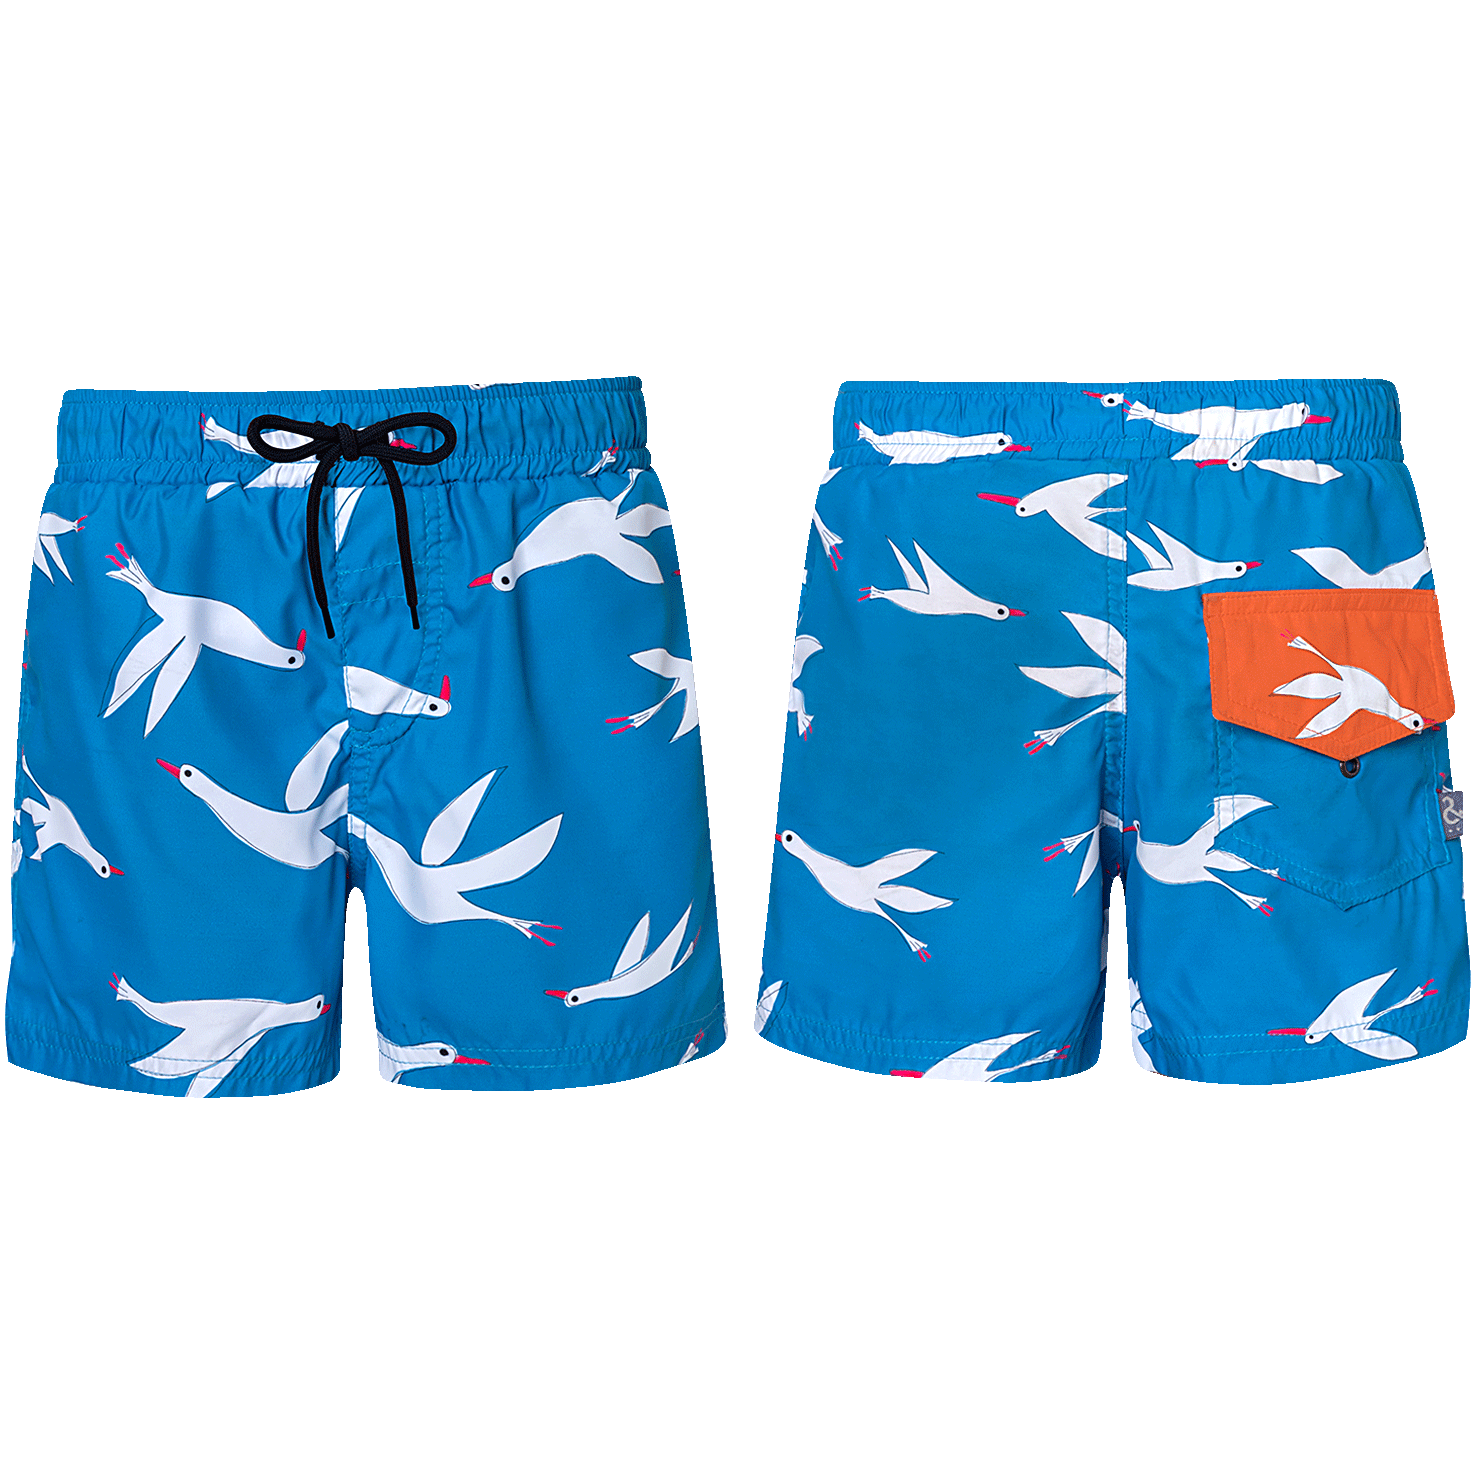 SWIMSHORTS - FLY SKY - Pingaló Store